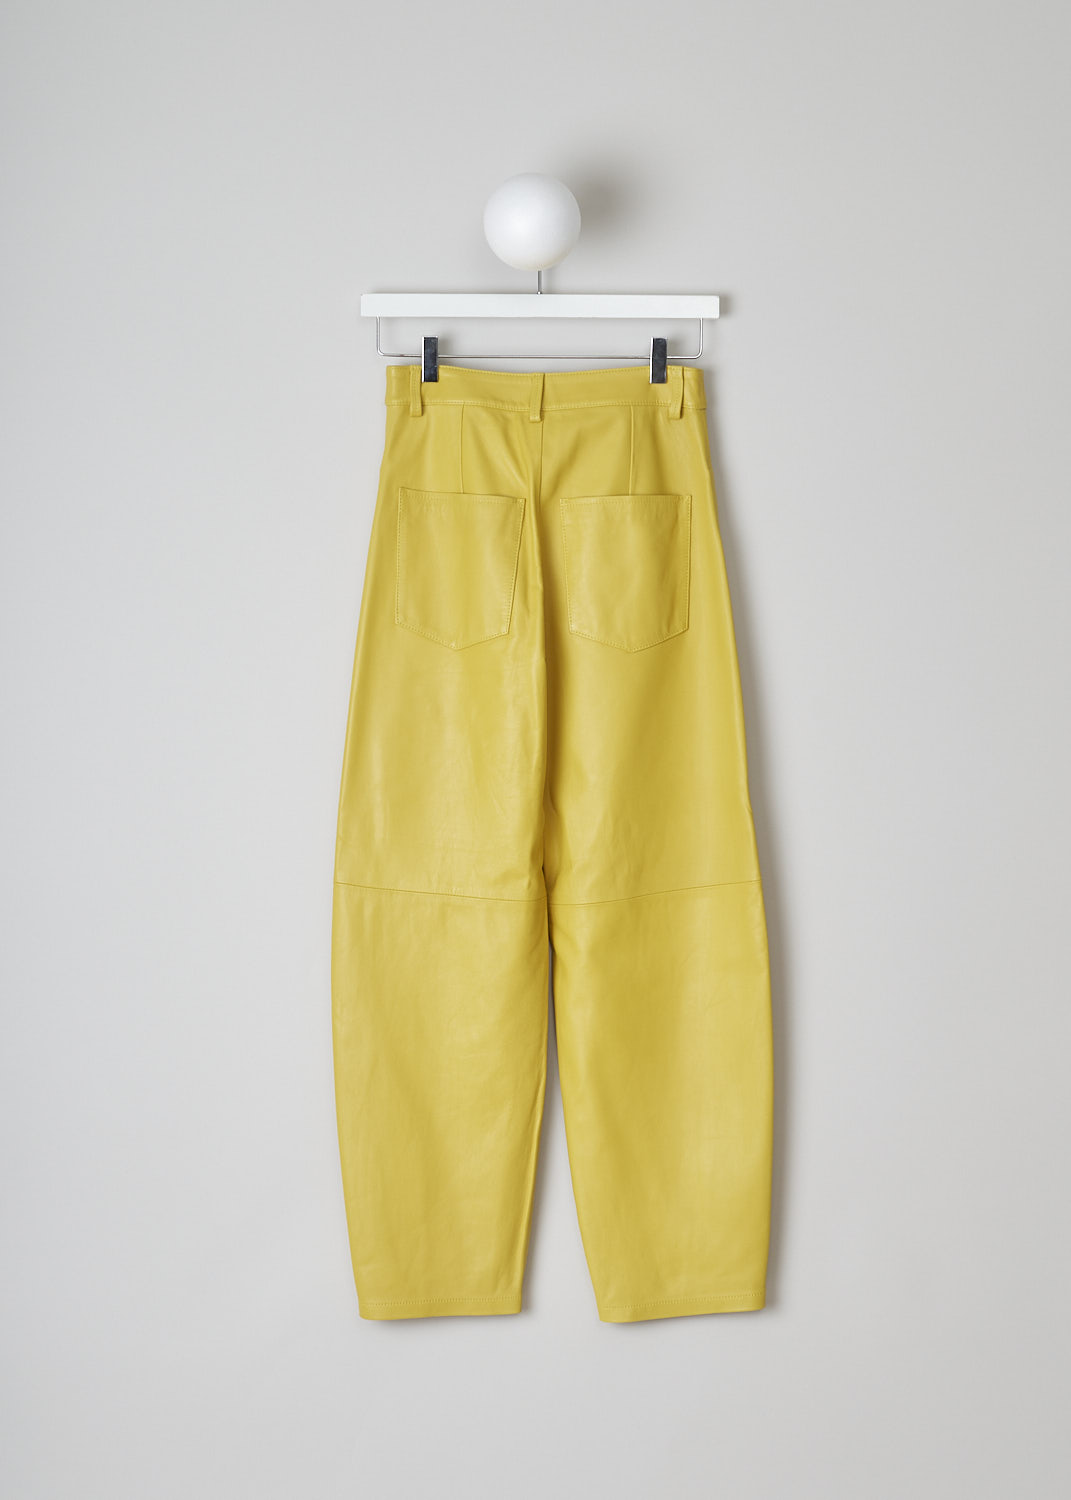 WANDLER, CHAMOMILE HOLIDAY PANTS, 22306_060301_1434_CHAMOMILE_HOLIDAY, Yellow, Back, These yellow leather Chamomile pants have a waistband with belt loops and a button and zip closure. The pants have a high-waisted fit. The balloon legs are cropped at the ankle. These pants have slanted pockets in the front and patch pockets in the back. 

